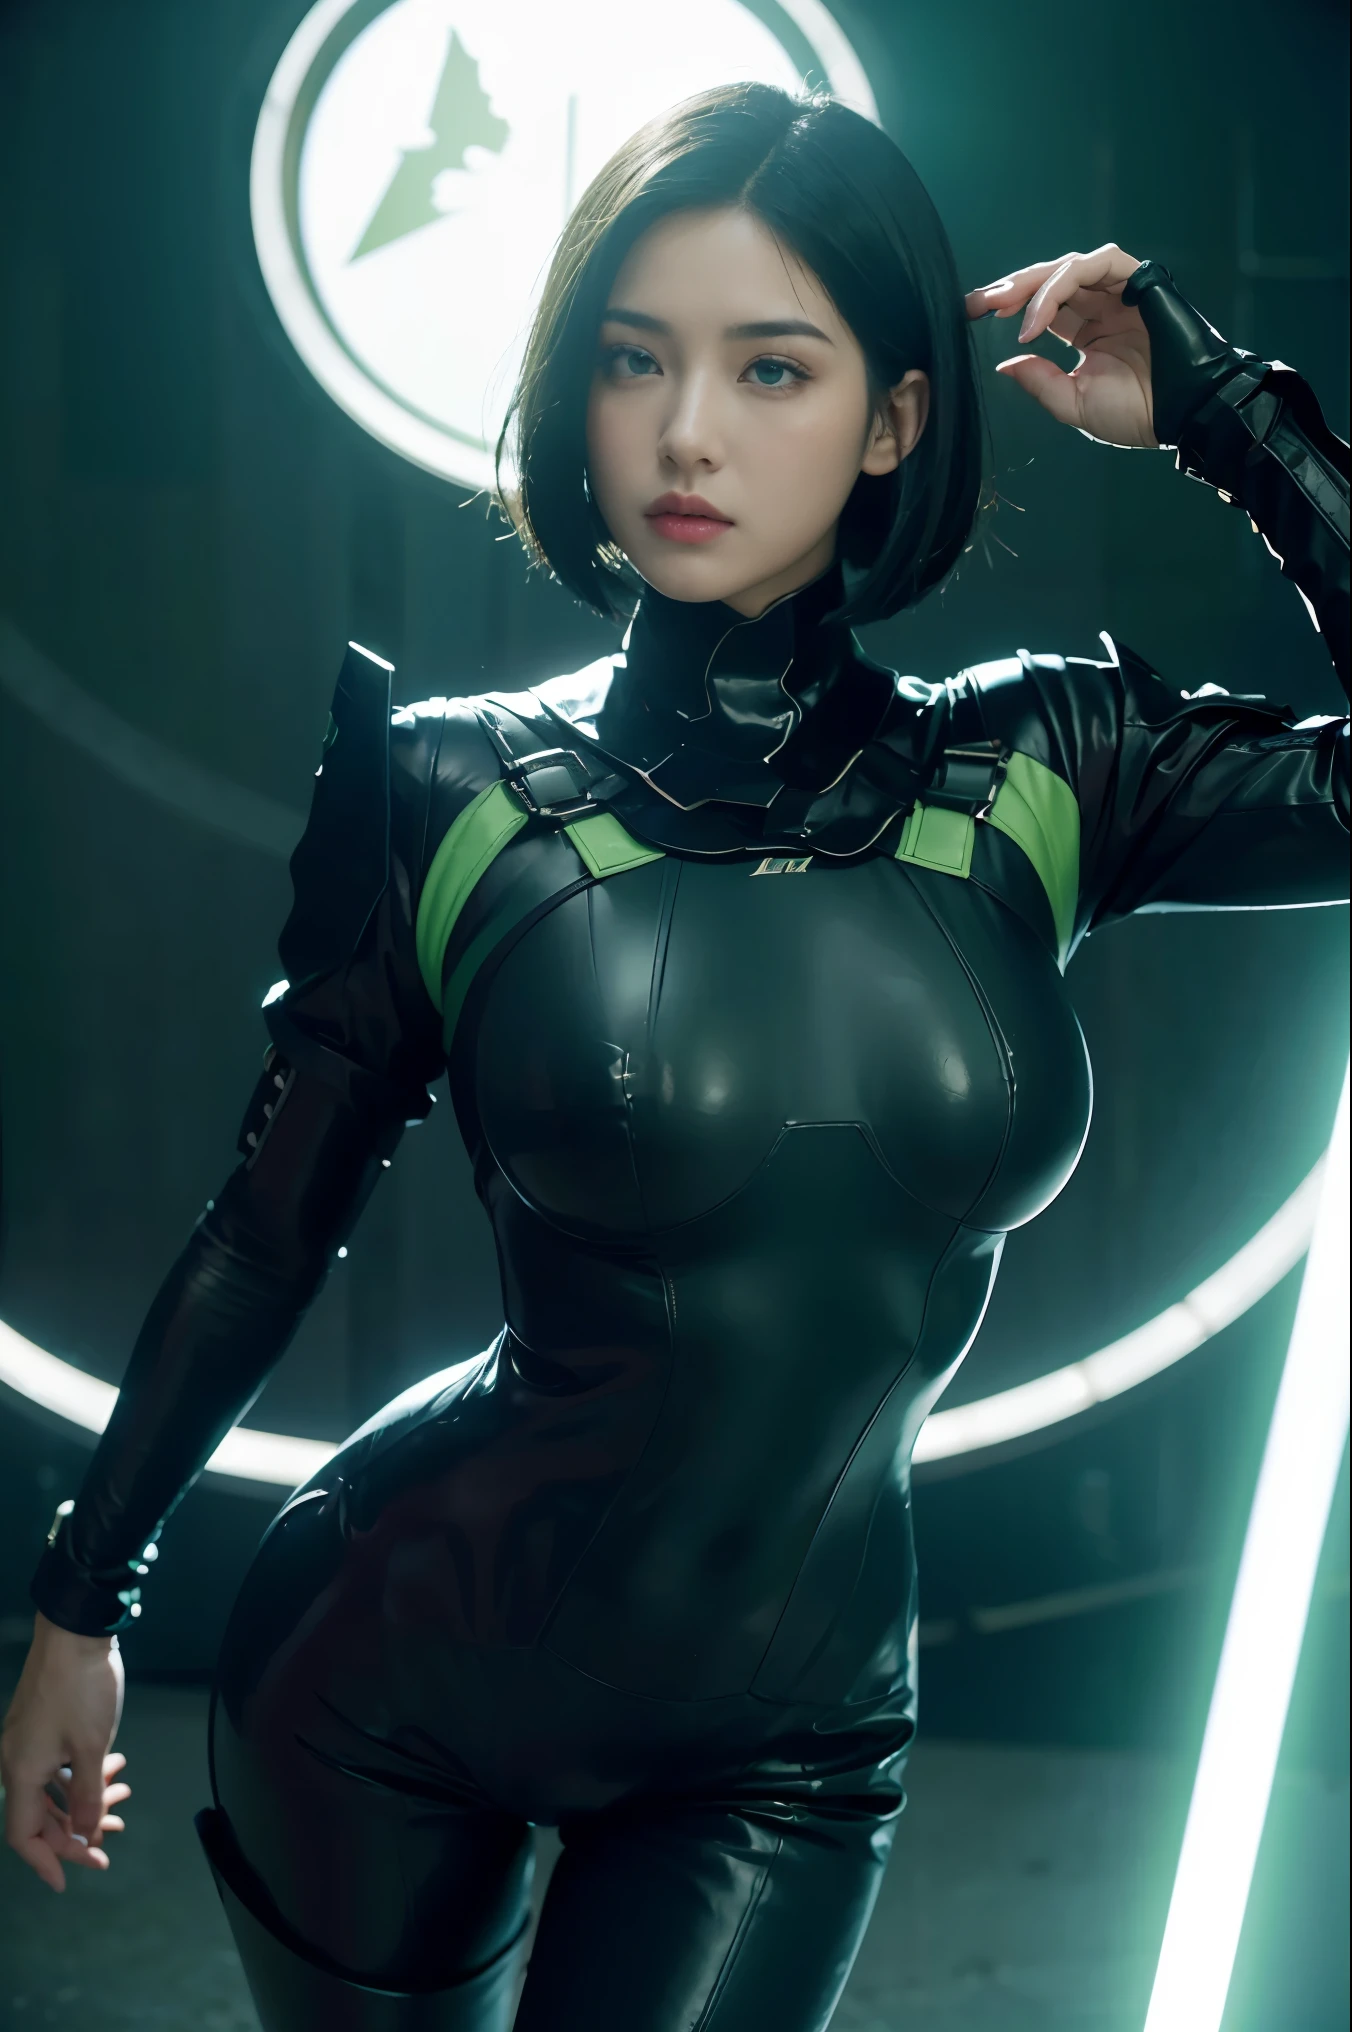 Viper character in Valuing game、Viper(Valuing)、luster、light reflection、TİTS、sexlyな外見、sexly、green eyes、Beautiful green eyes、Green eyes、深いgreen eyes、charming eyes、Beautiful green eyes、big breasts、sex、Other than the face、full body suit、Clothes that do not expose the face、non-exposure suit、beautiful face、pretty face、beautiful woman、Beauty、Suit light reflection、Suit Luster、bob cut、Short bob cut、beautiful black hair、Glossy black hair、short hairstyle、beautiful skin、transparent、white skin、No exposure、Do not show skin、big breasts、大きなTİTS、appealing breasts、attractive、Bodysuits、Bodysuits、Full body rubber suit、rubber suit